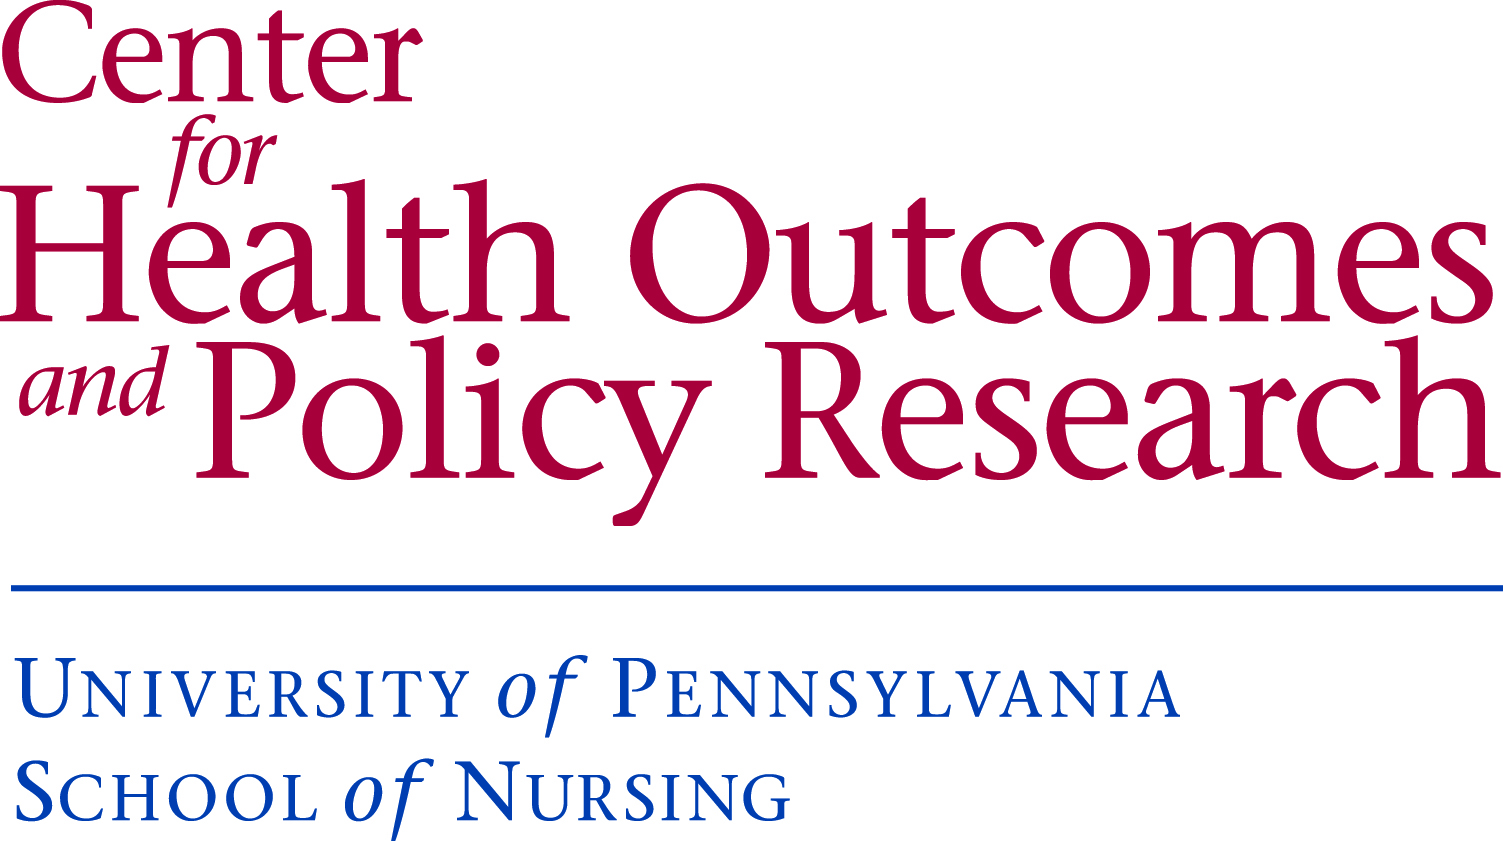 U_Penn_Nursing_center_for_health_outcomes_and_policy_research